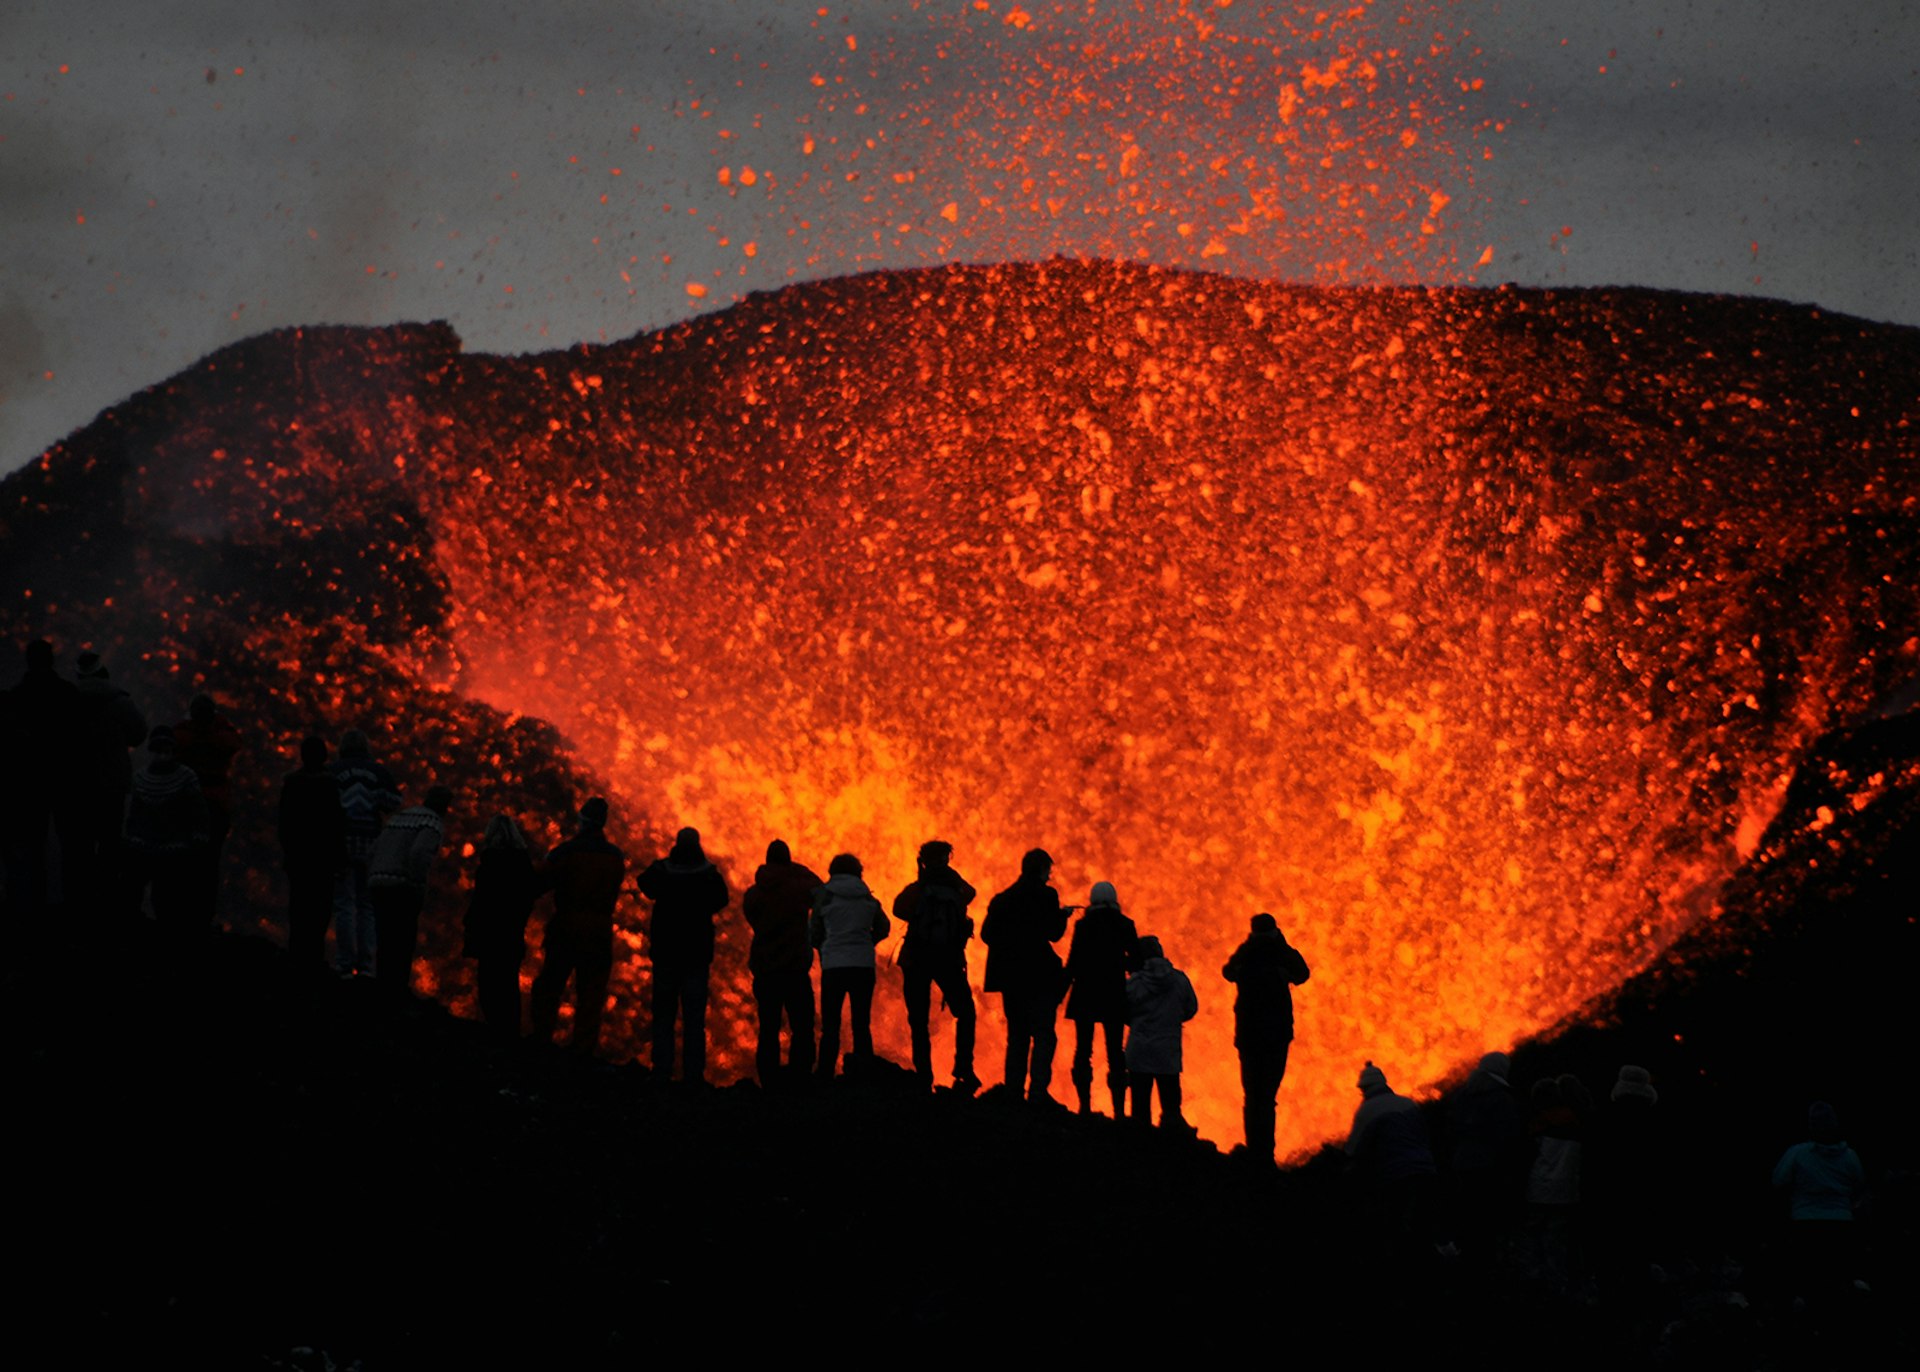 A group of adventurers witnessing the eruption of Iceland's Eyjafjallajökull, one of three volcanoes which the Lava Centre's viewing platform overlooks © TrueCapture / Getty Images